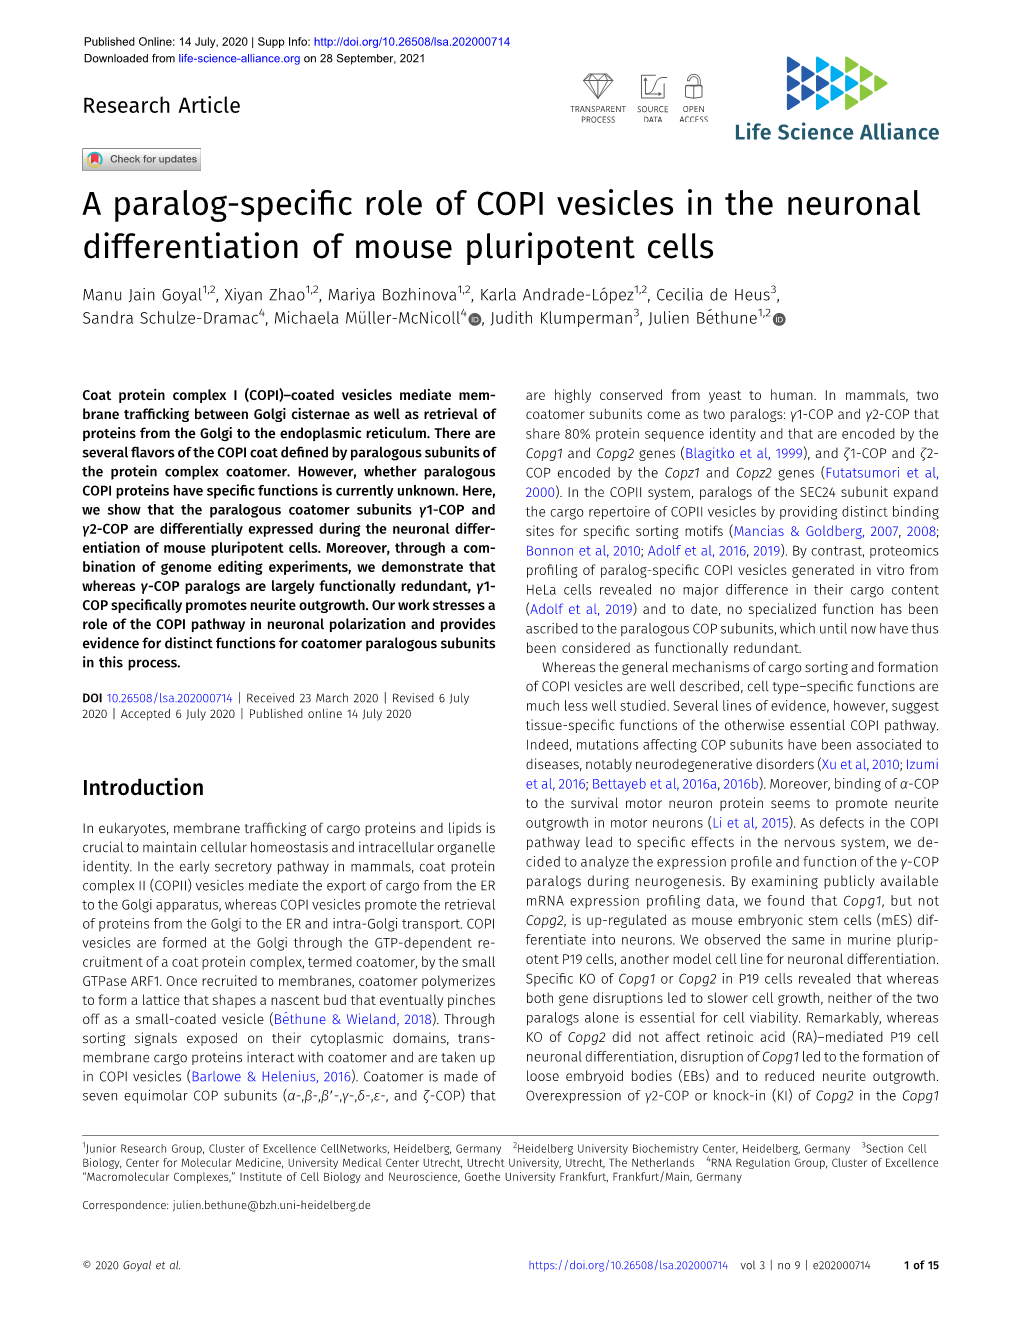 A Paralog-Specific Role of COPI Vesicles in the Neuronal